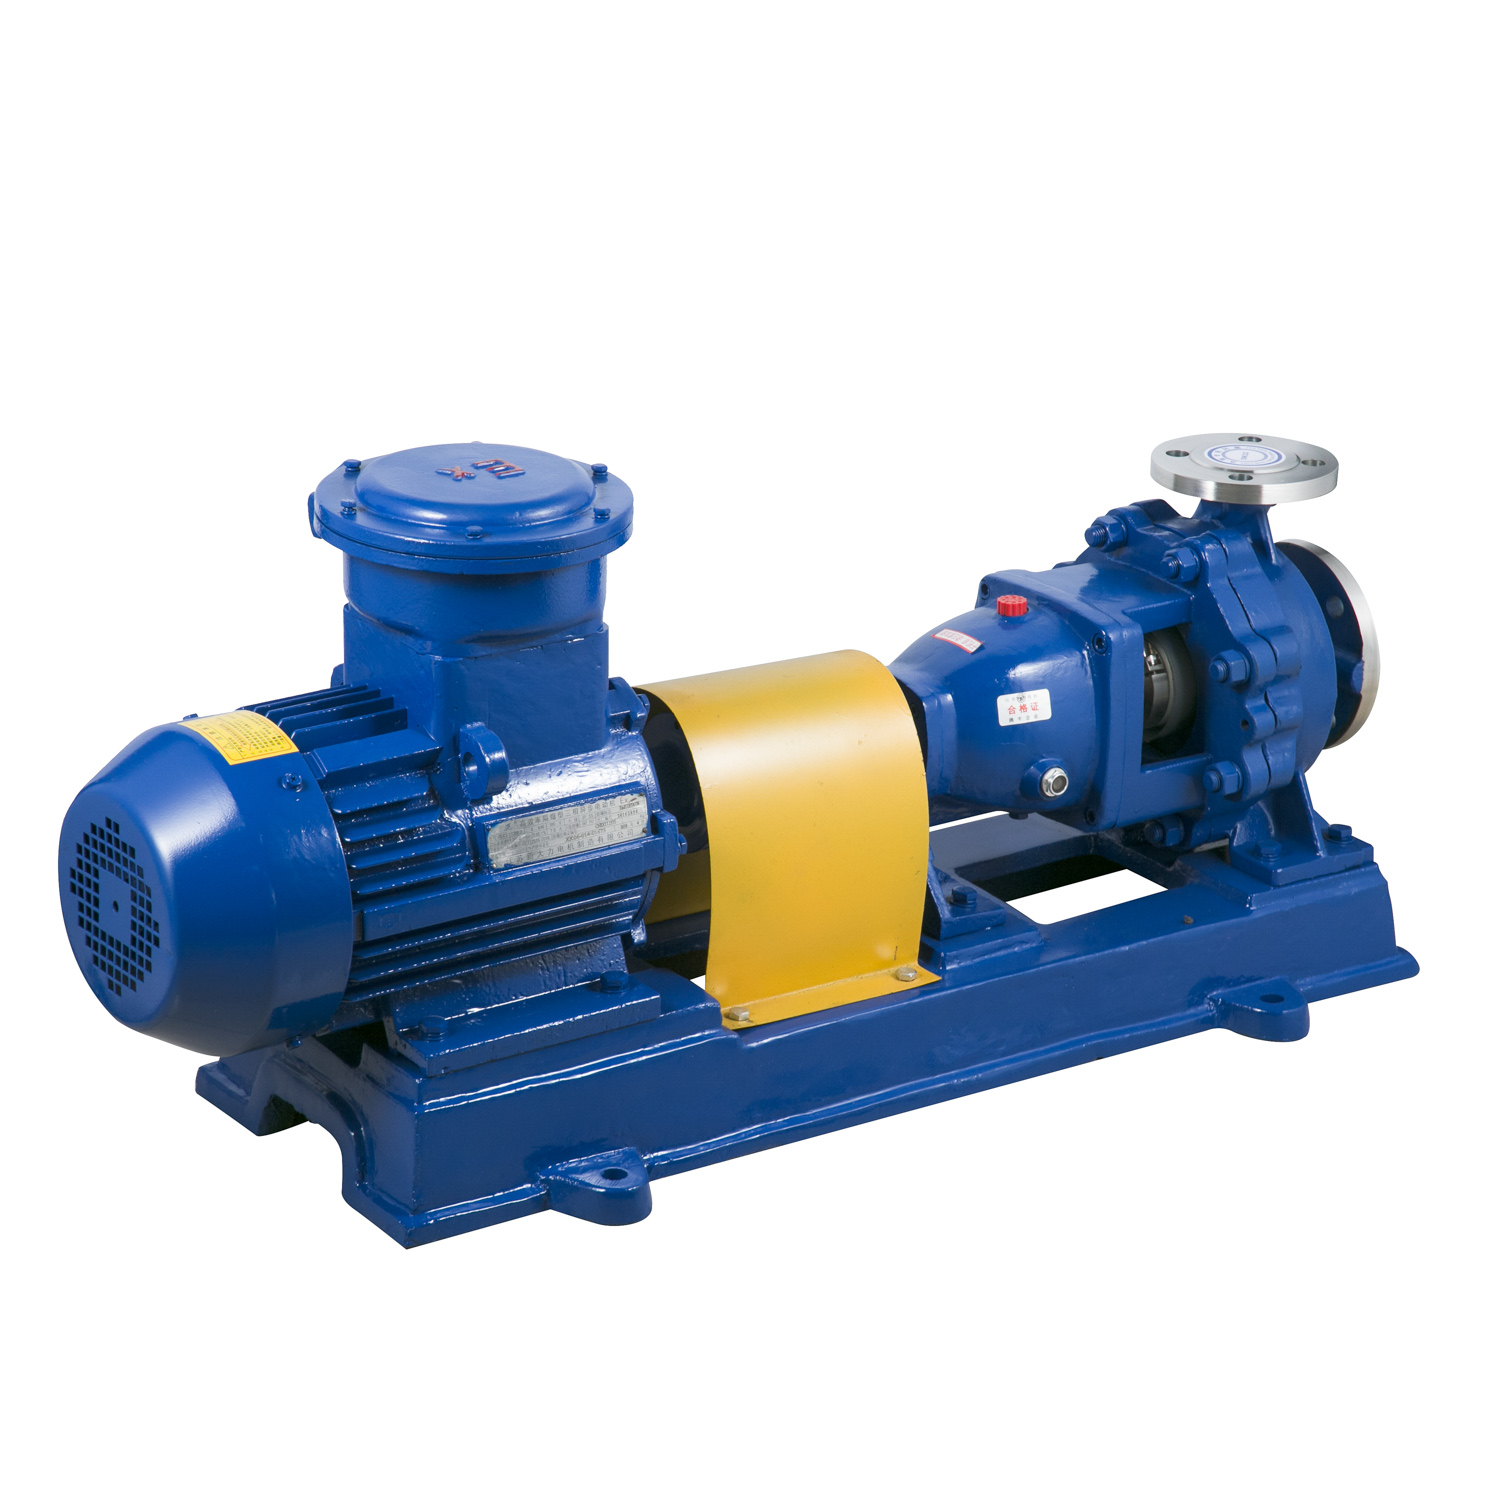 IH Single Stage &Single Suction Centrifugal Chemical Pump